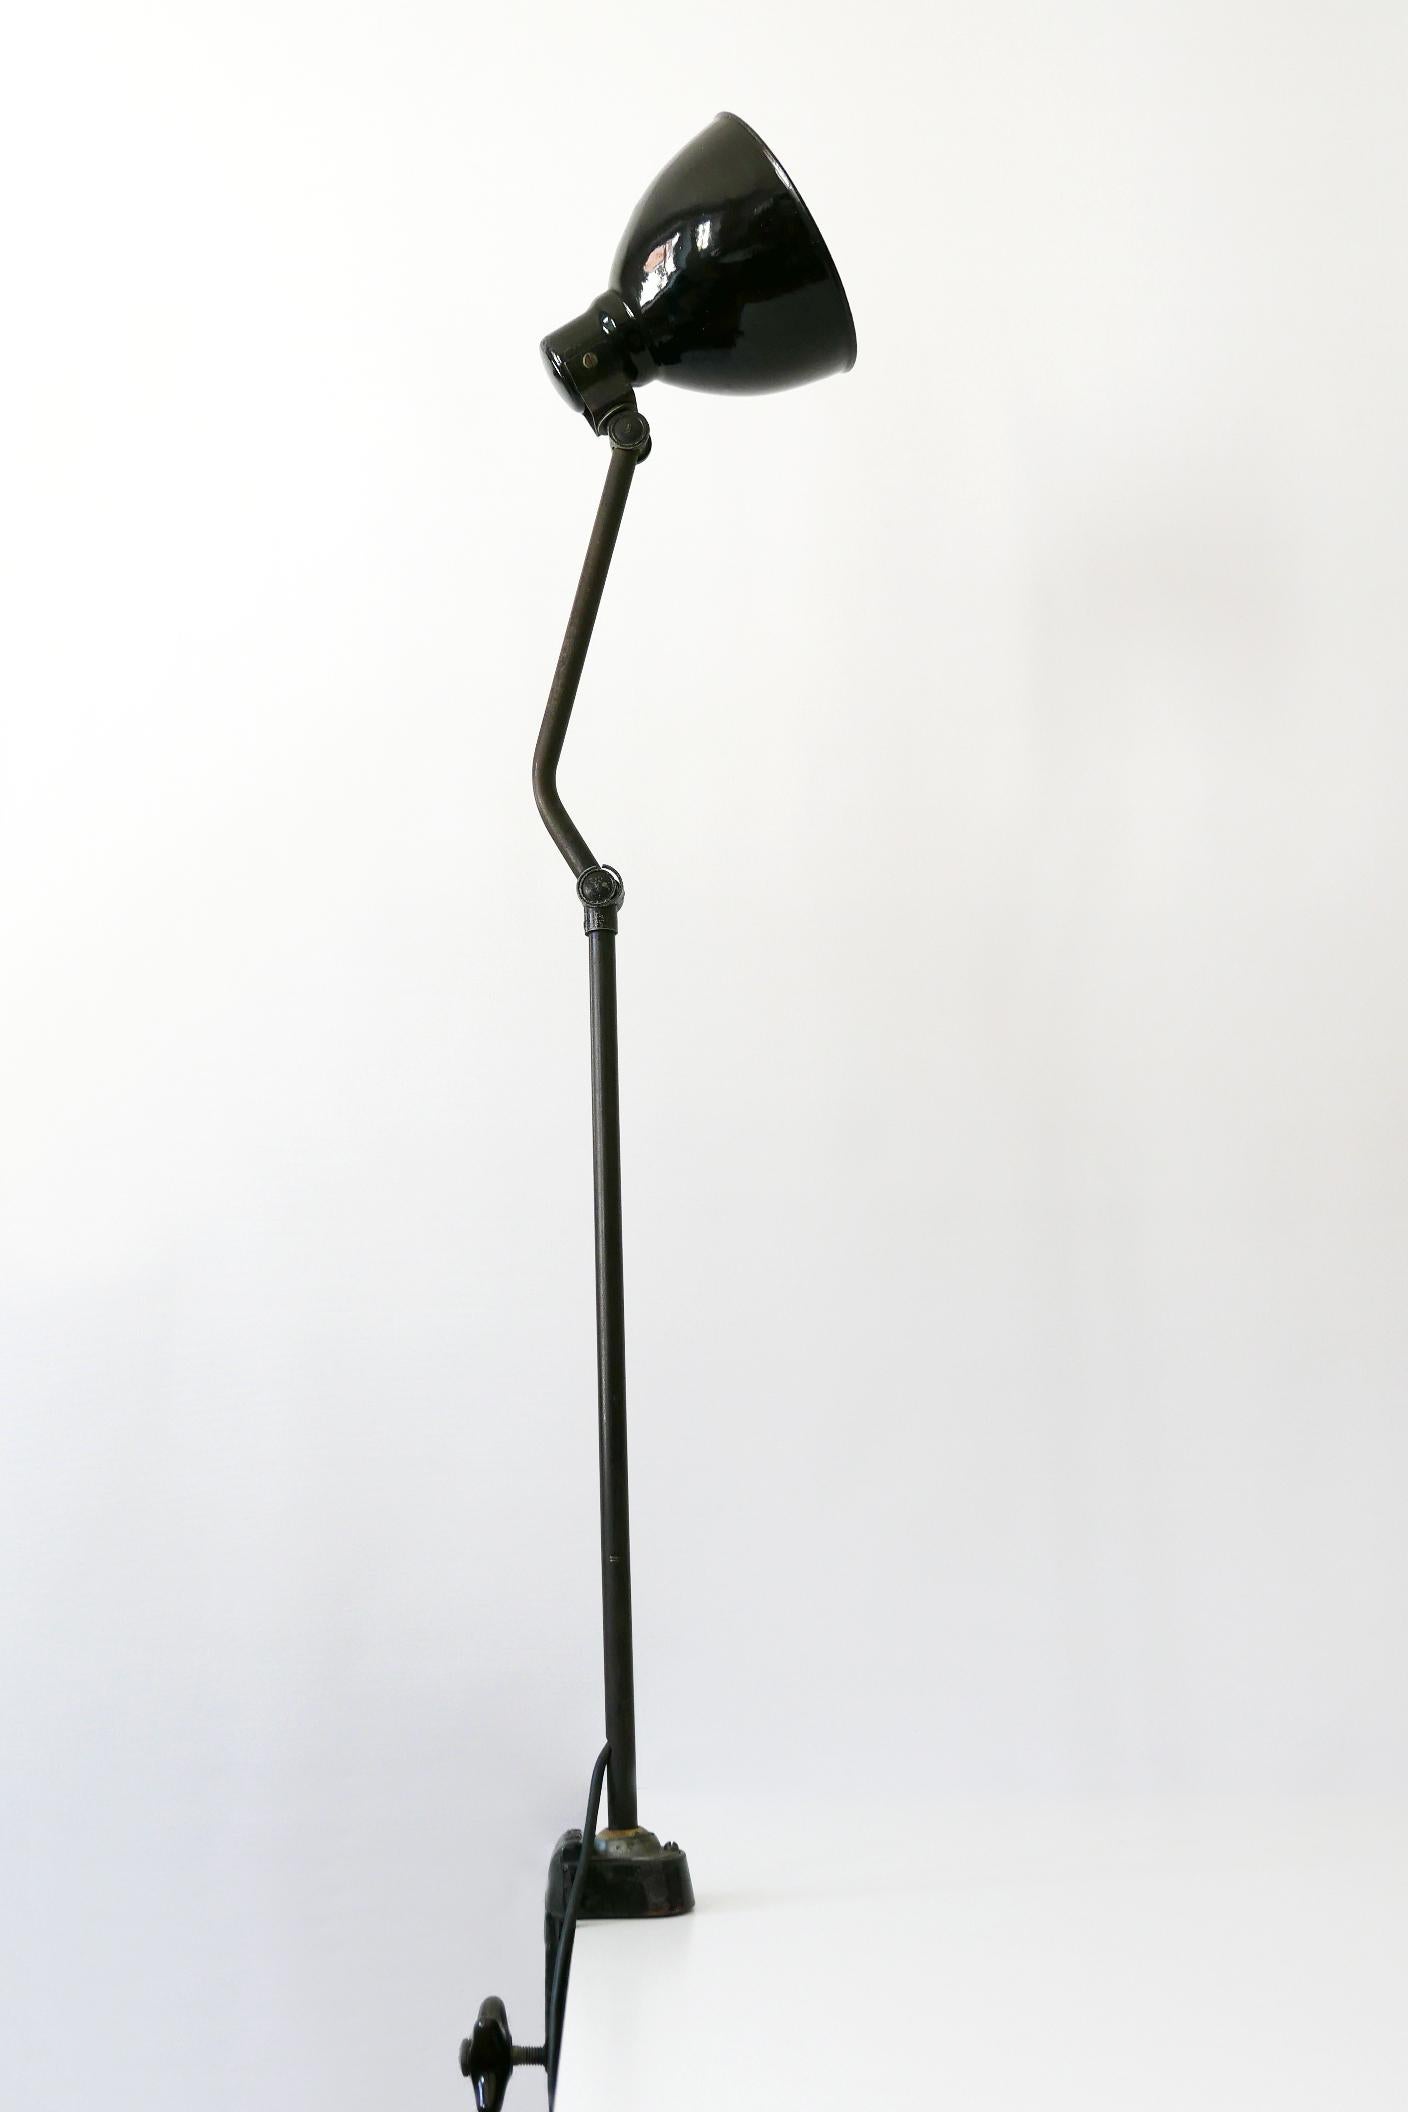 Metal Bauhaus Task Lamp or Clamp Table Light by Peter Behrens for AEG 1920s, Germany